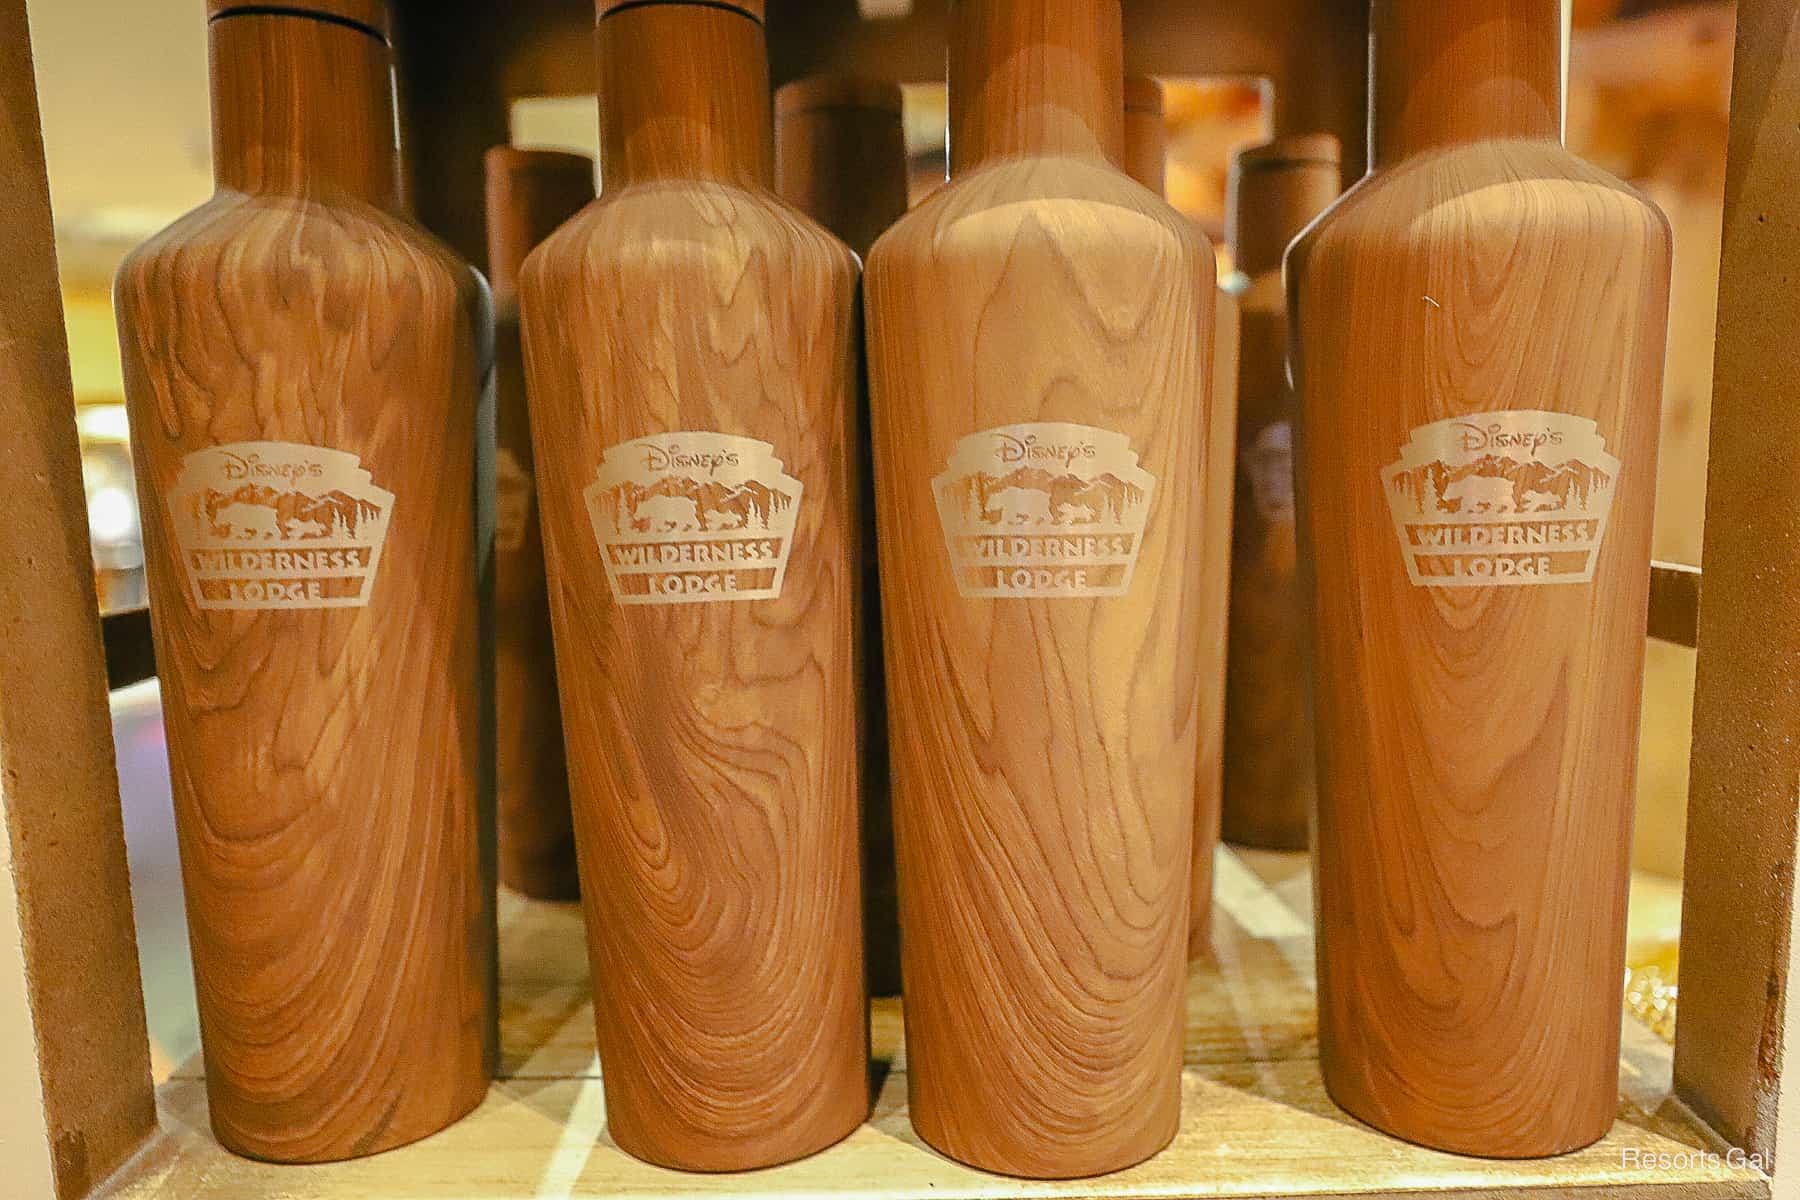 tumblers that have a wood grain look with Disney's Wilderness Lodge on them 